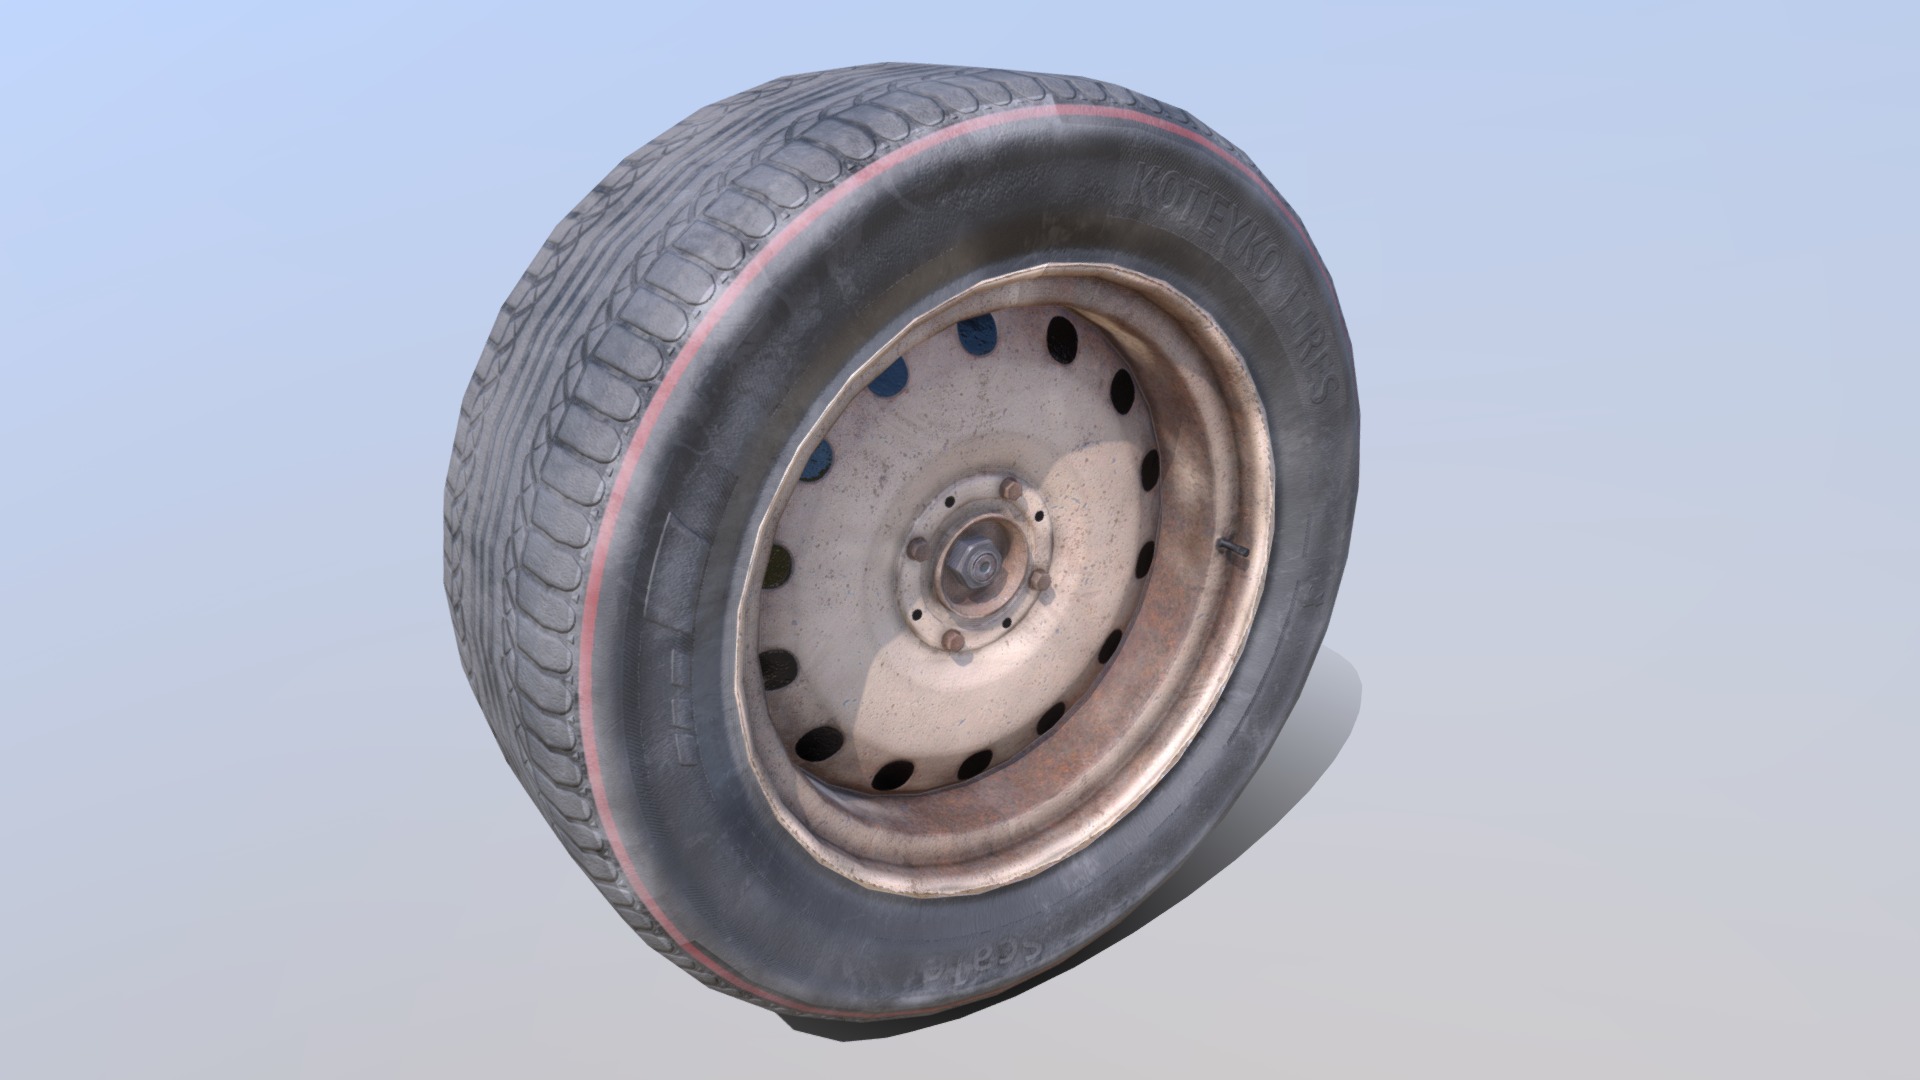 3D model Car wheel - This is a 3D model of the Car wheel. The 3D model is about a tire on a vehicle.